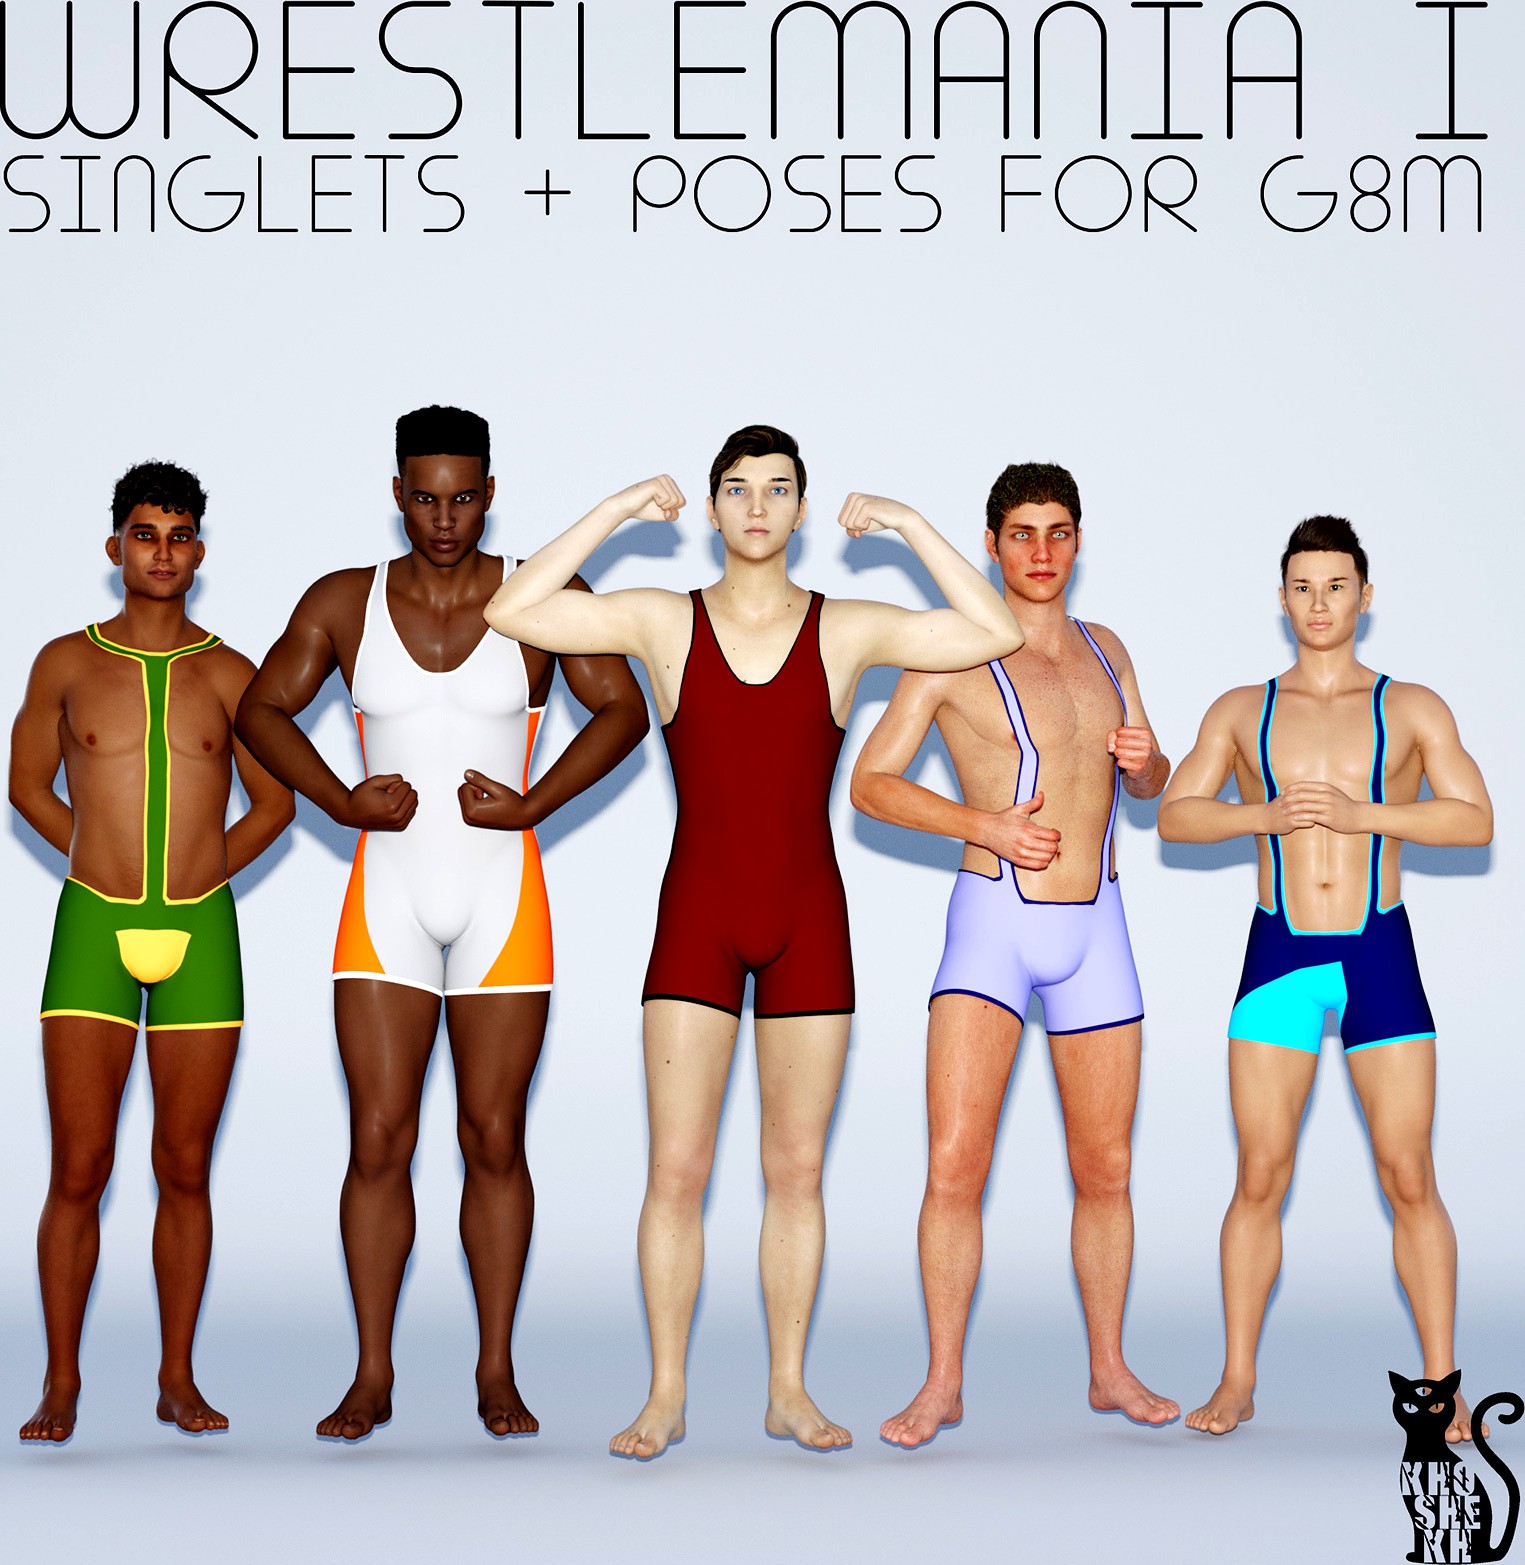 WrestleMania 01 - Poses and Singlets for G8M